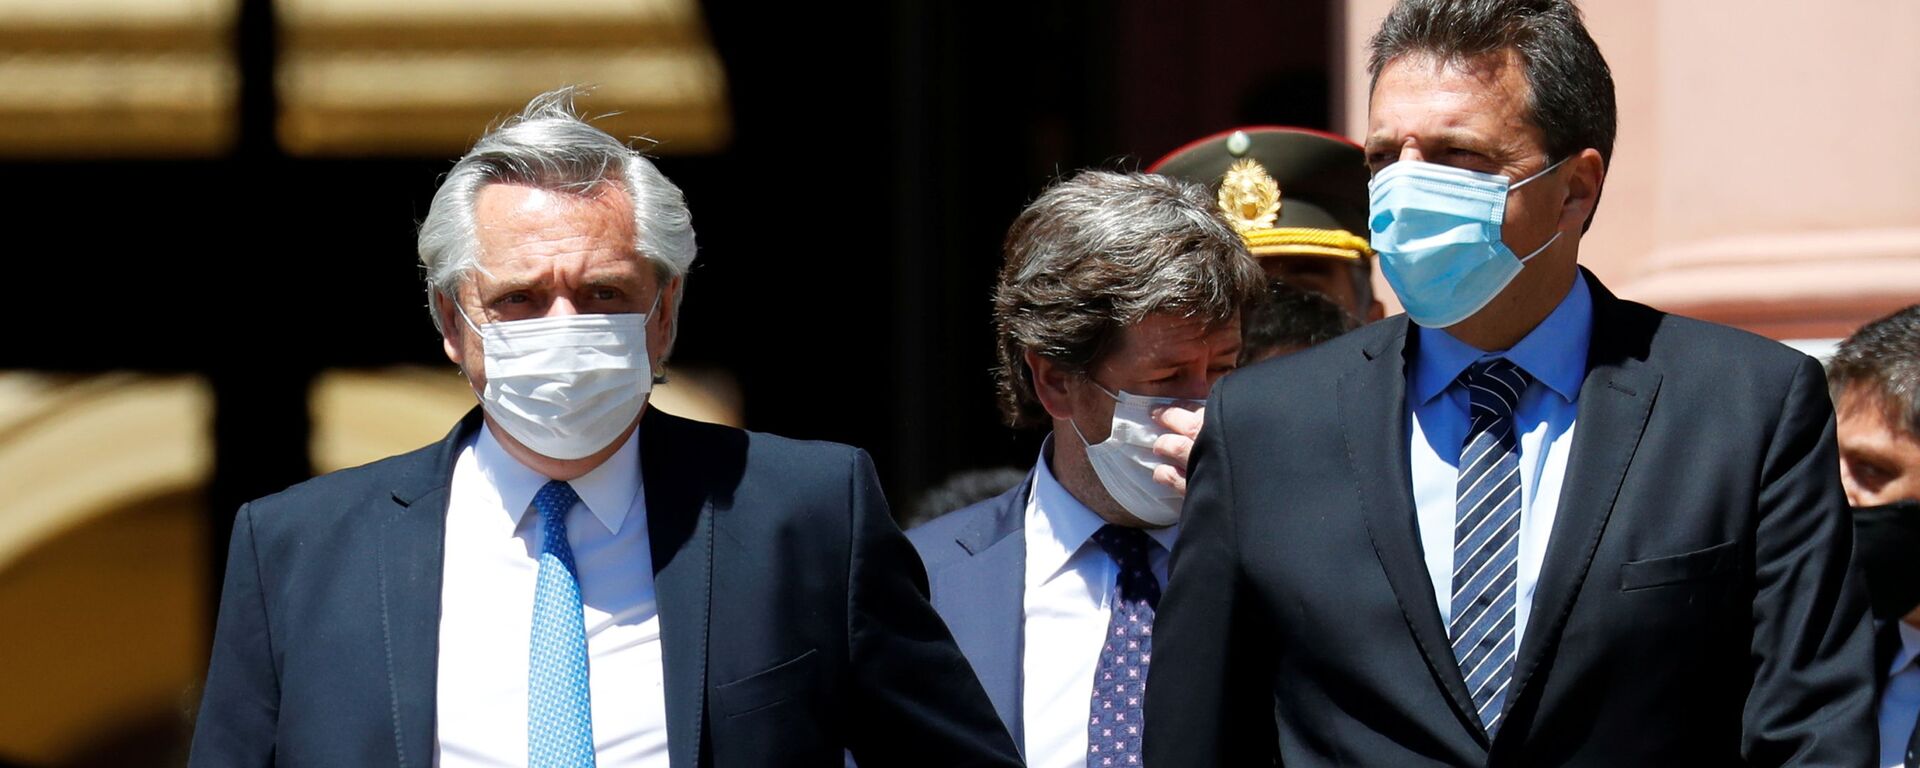 Argentina's President Alberto Fernandez walks next to the President of the Chamber of Deputies, Sergio Massa, towards the Kirchner Cultural Centre to participate in an event in honor of late former President Nestor Kirchner, outside the Casa Rosada Presidential Palace, in Buenos Aires, Argentina October 27, 2020.  - Sputnik International, 1920, 11.11.2020